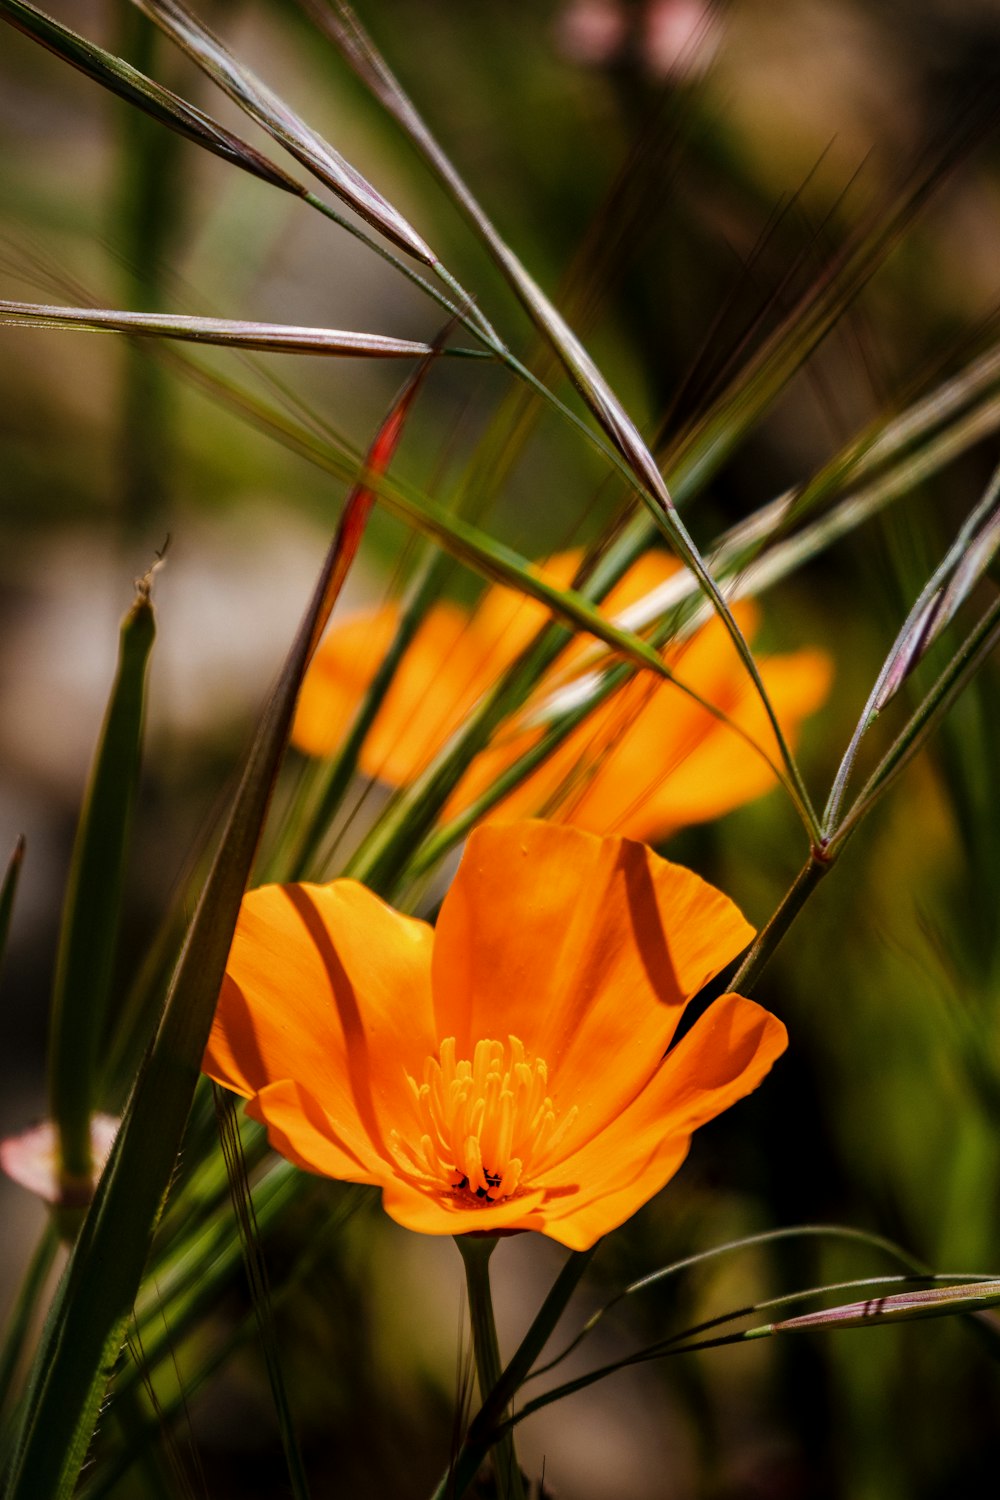 a close up of an orange flower in a field